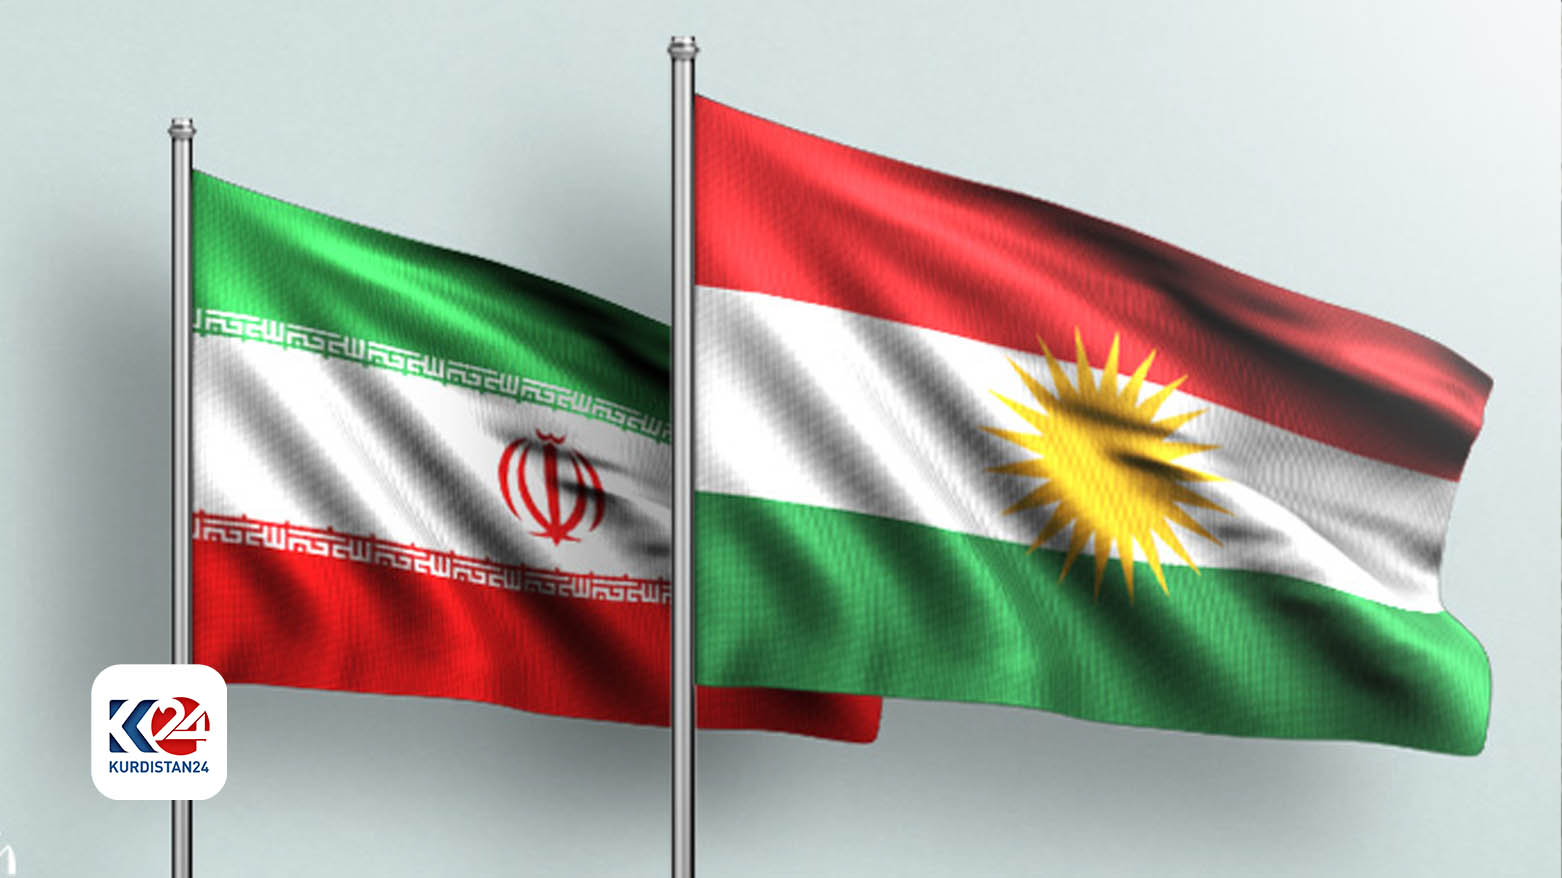 Iran to strengthen scientific and technological cooperation with Kurdistan Region